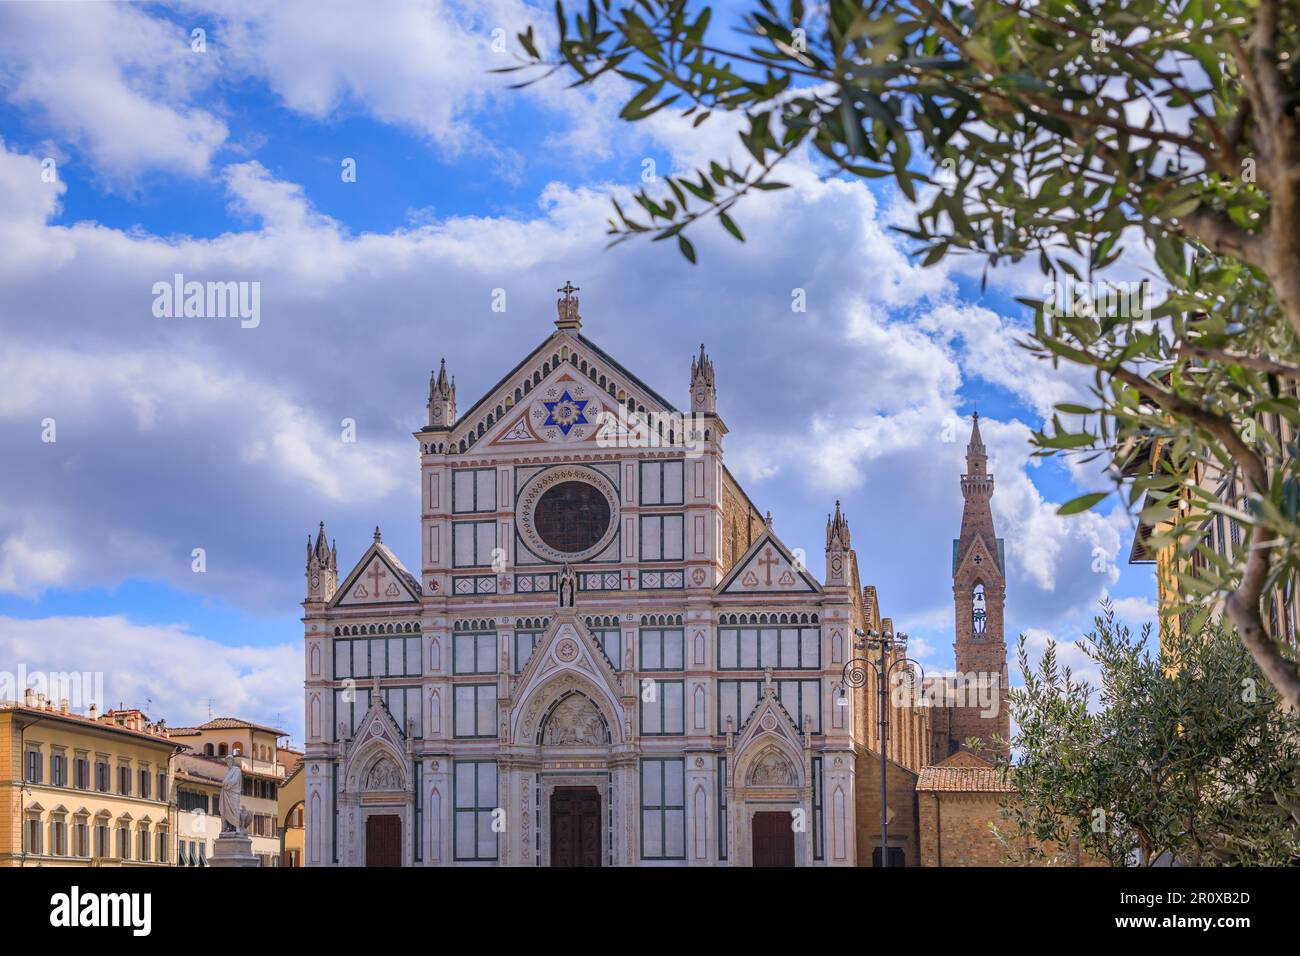 The Basilica of the Holy Cross, a franciscan masterpiece in Florence Italy: view of gothic revival facade. Stock Photo